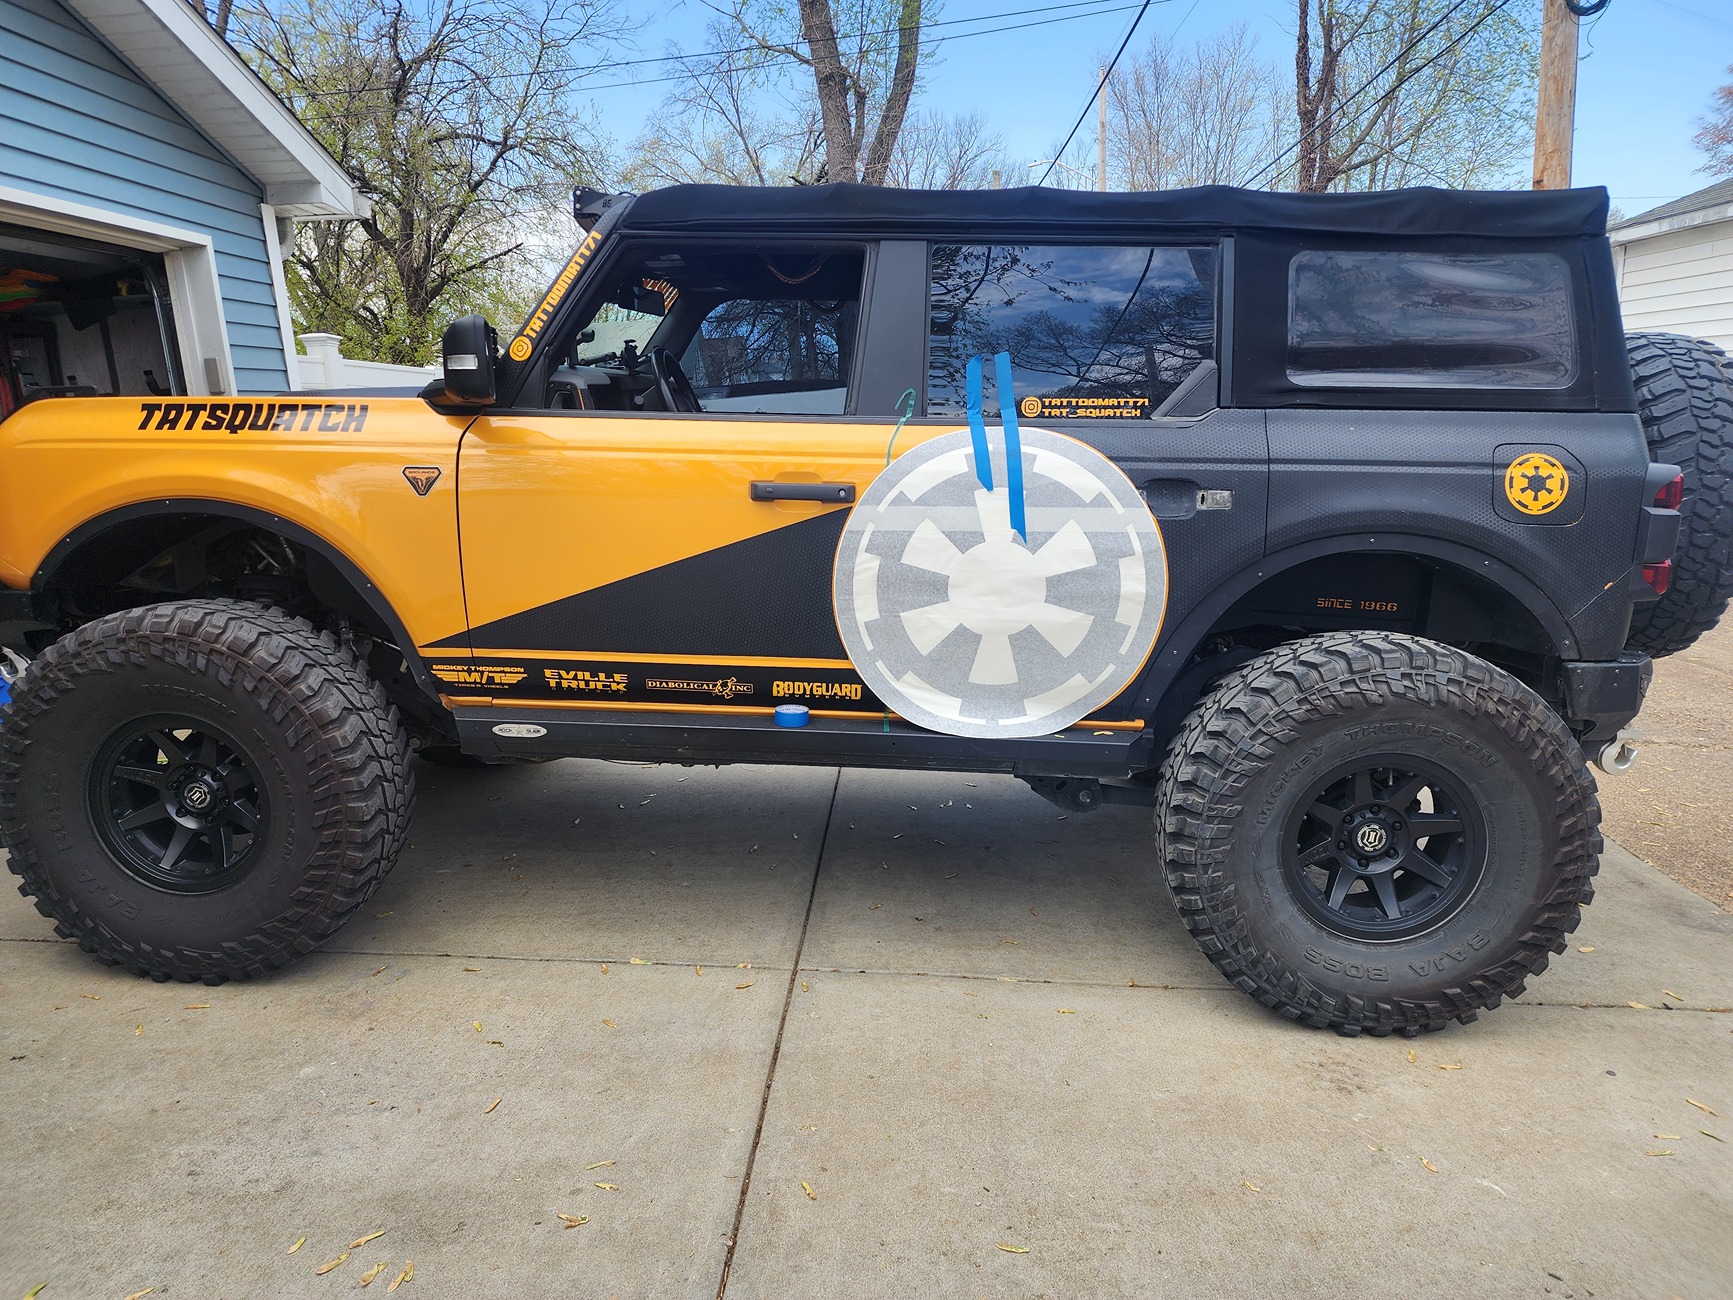 Ford Bronco Transformation Tuesday: Show Us Your Build Before-During-After! 20240407_105829